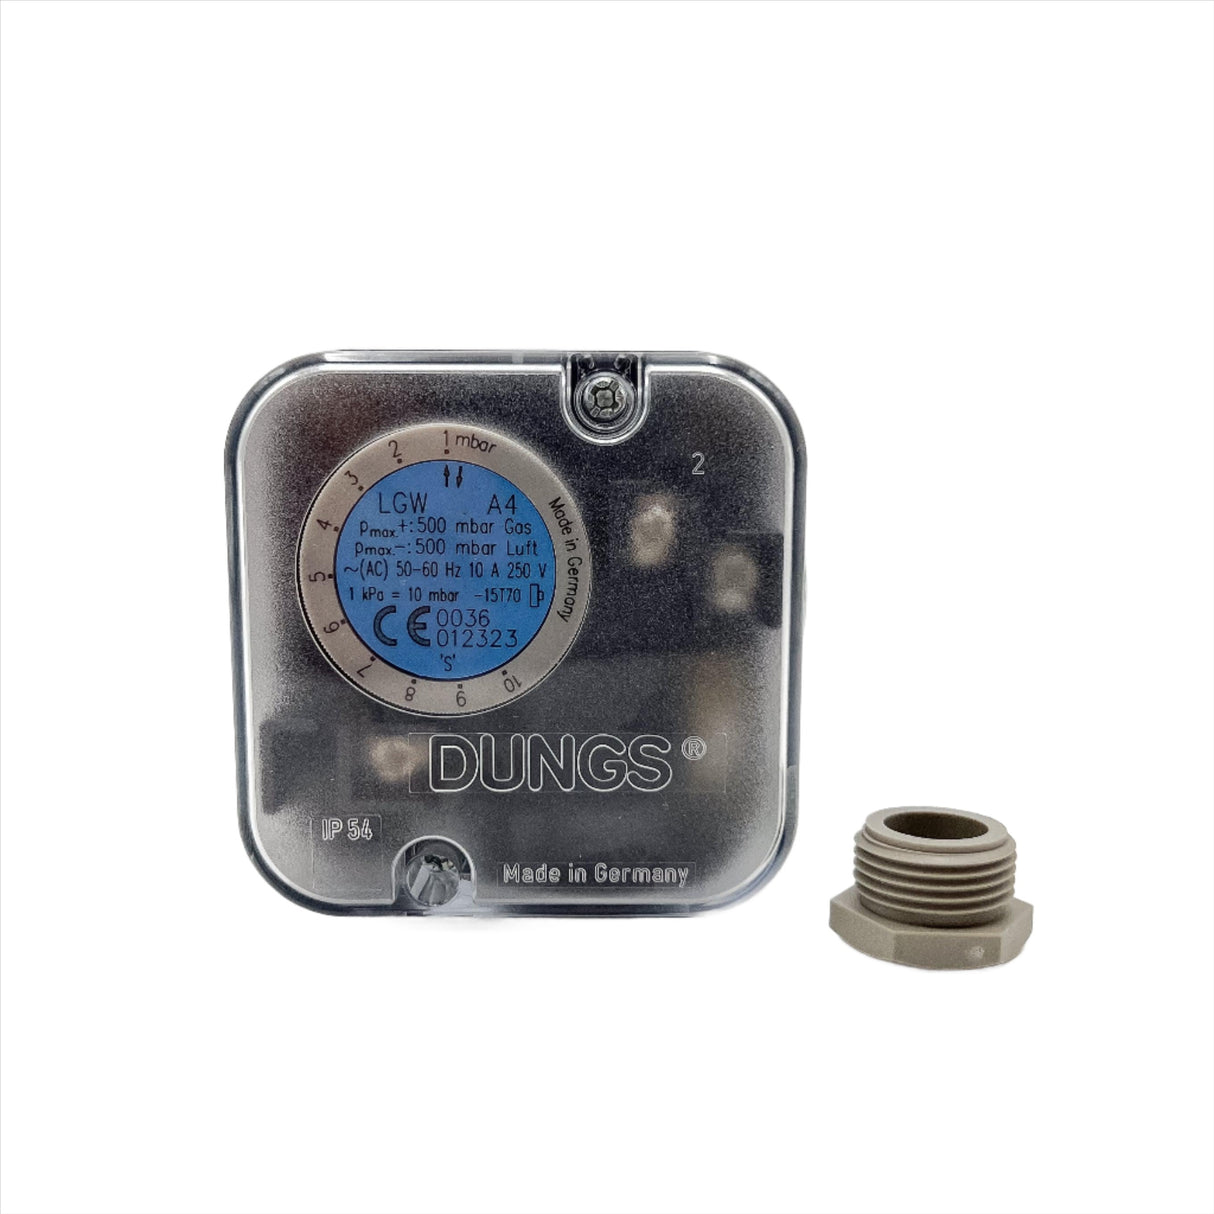 Dungs LGW10 A4 1-10 mbar Differential Air Pressure Switch